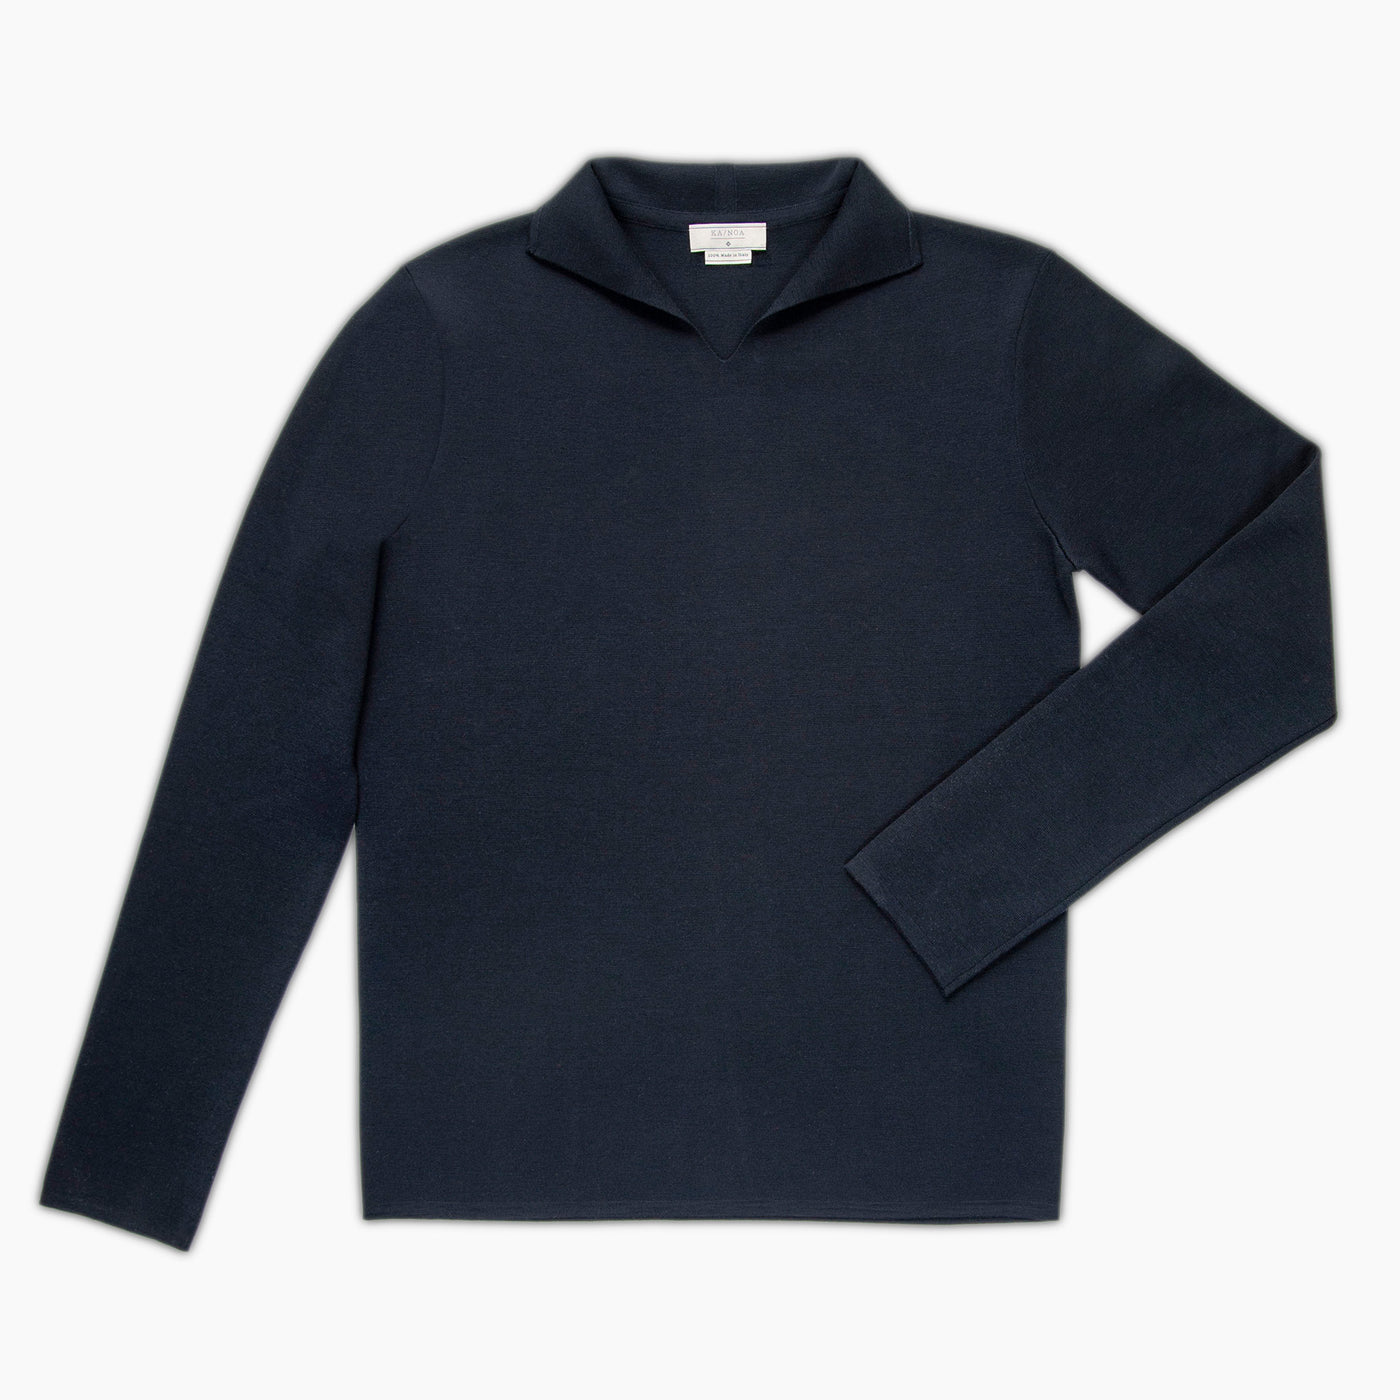 Joel long extrafine wool sleeved jumper with buttonless opening